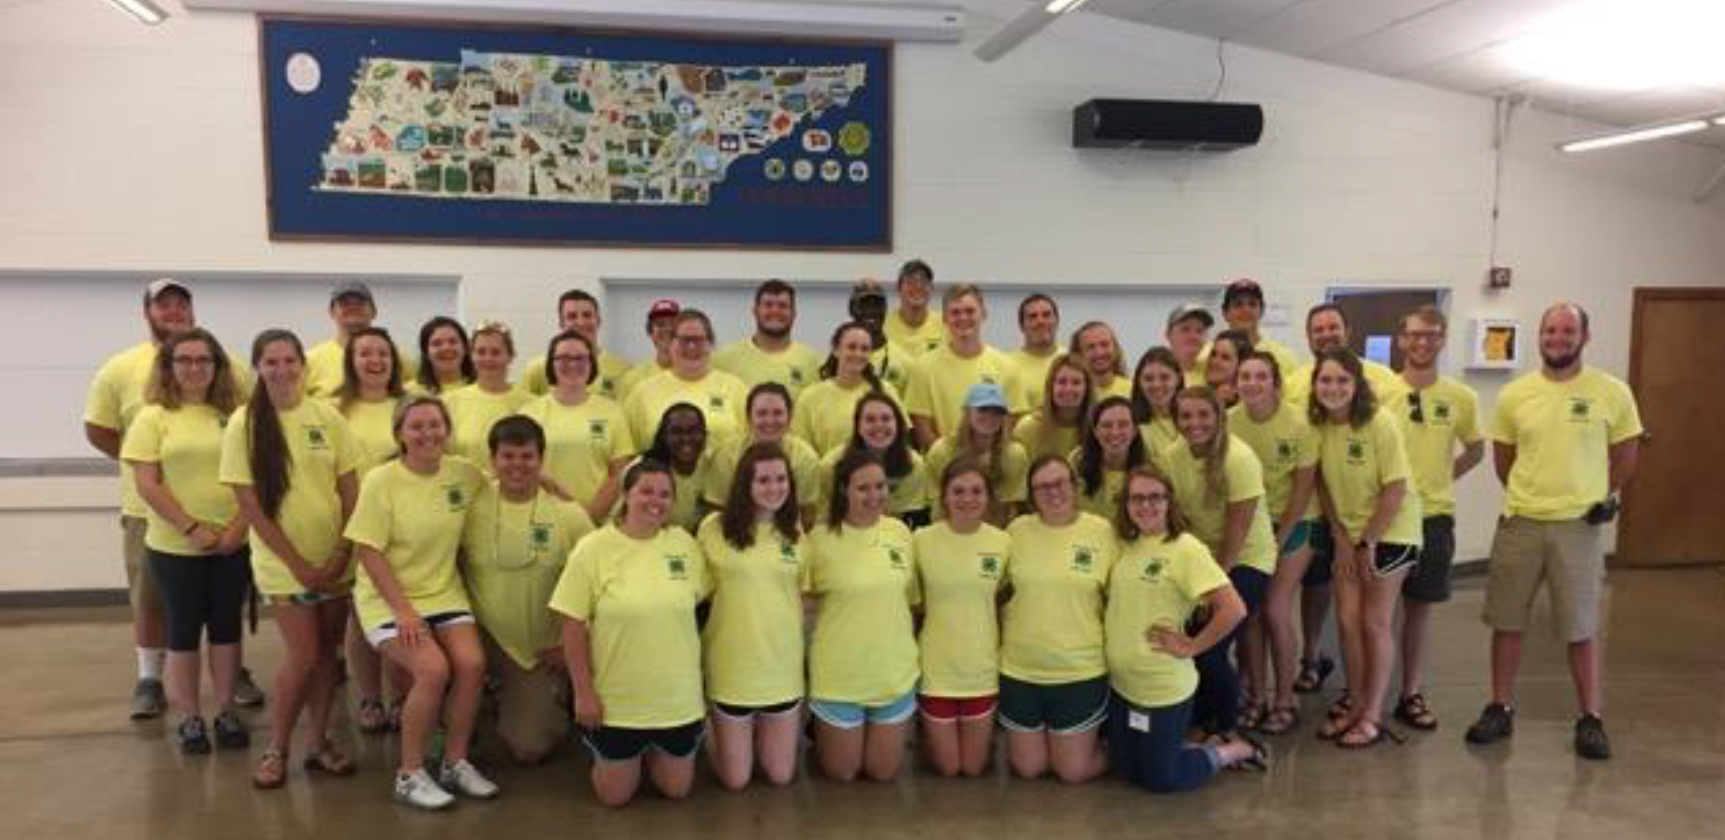 4-H CAMP STAFF READY TO GO!!!